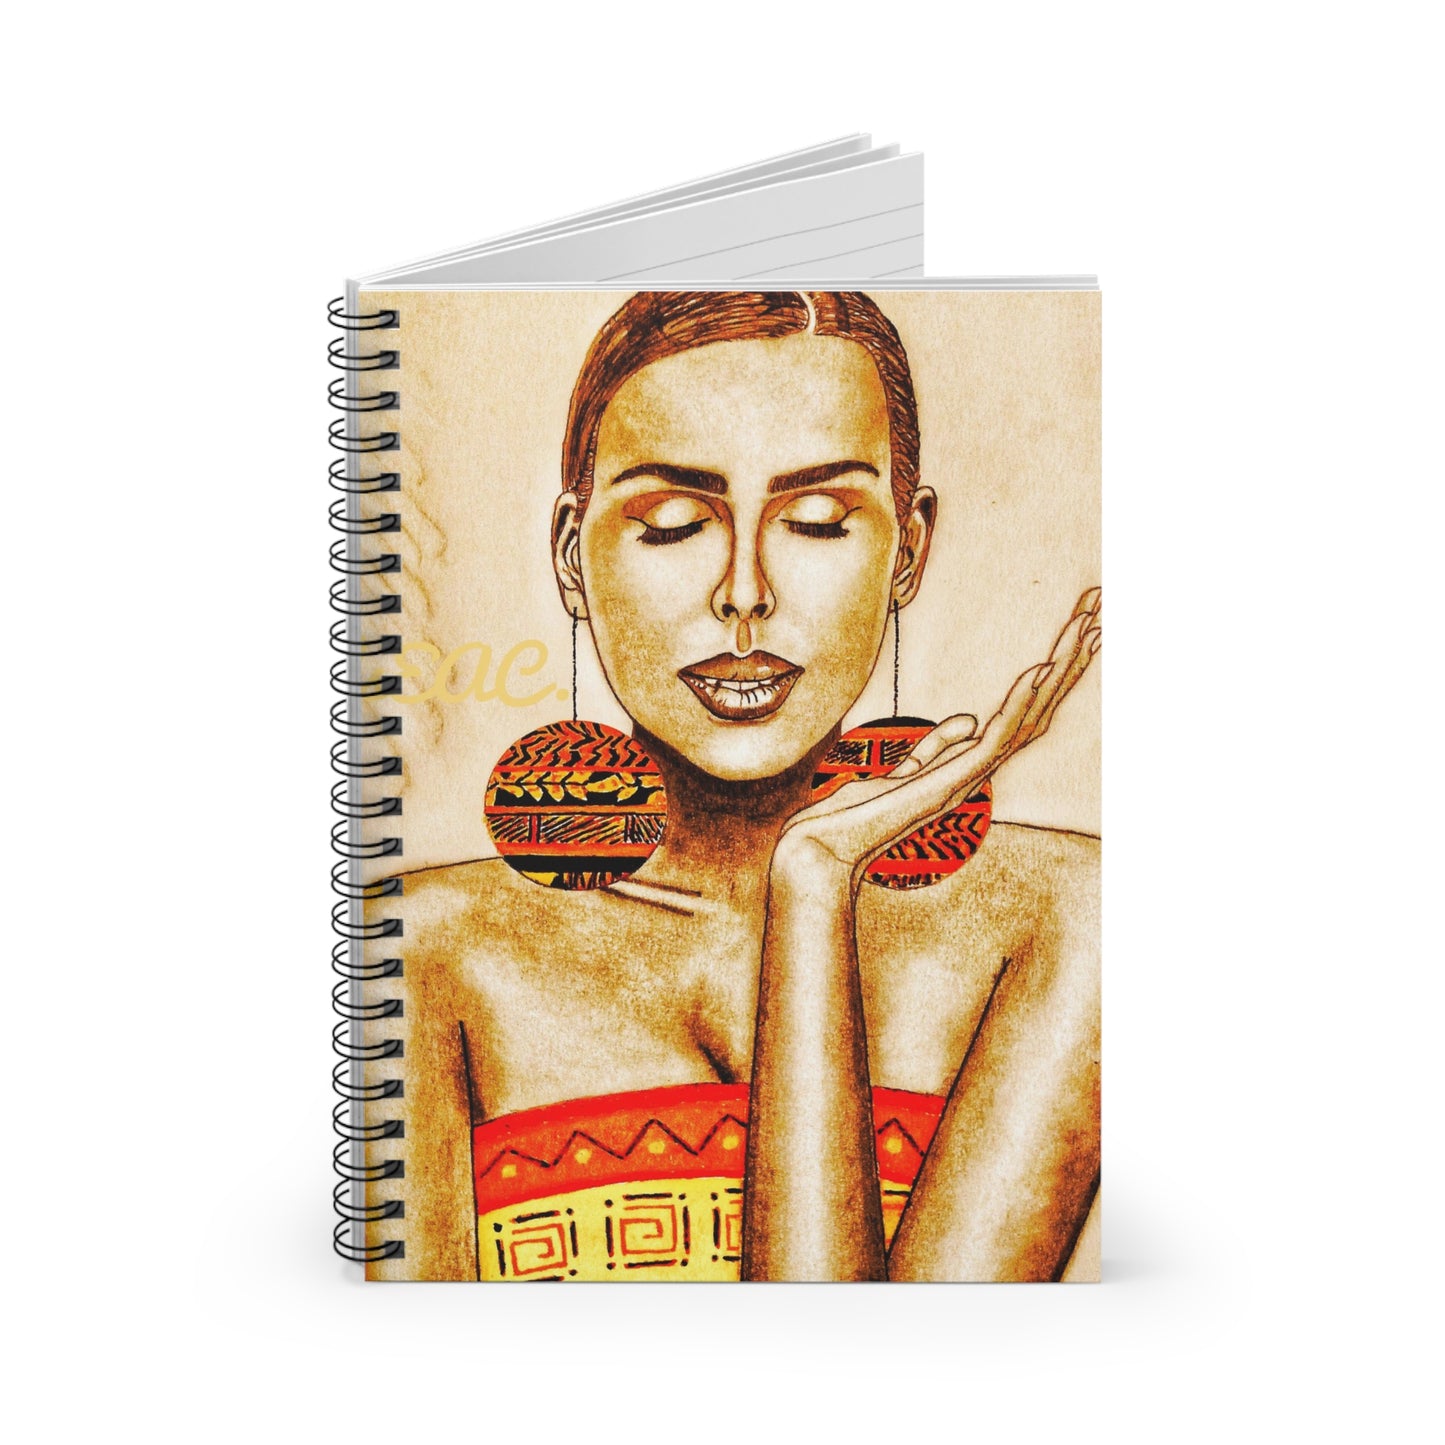 Stylish Rust Red Spiral Notebook - Ruled Line